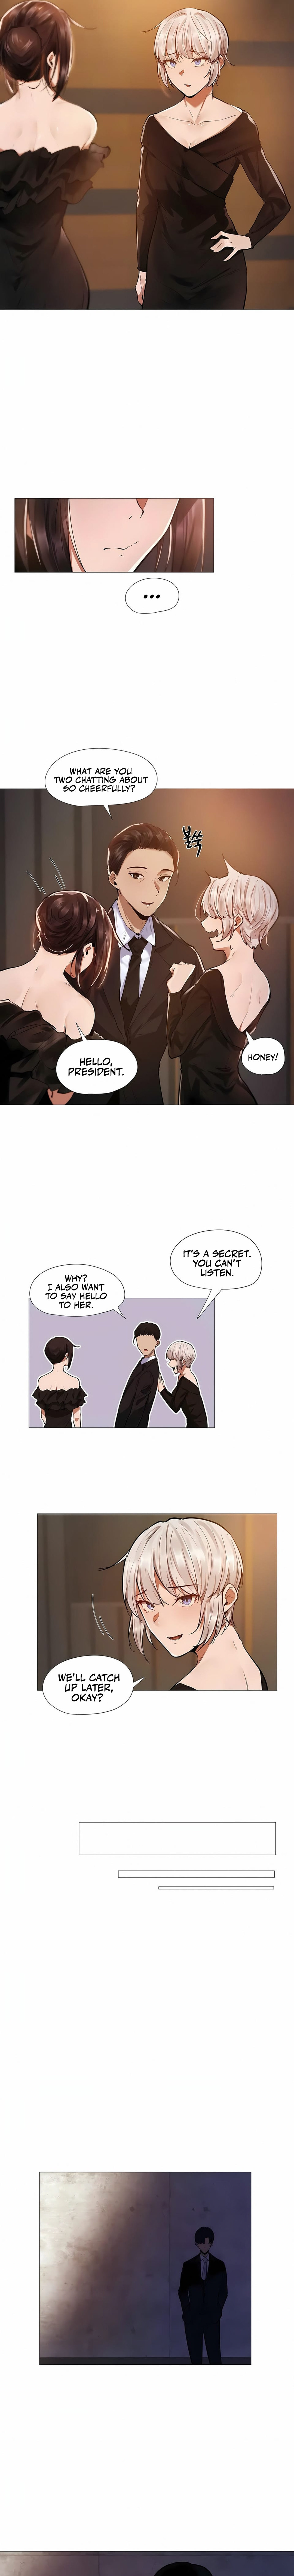 Let’s Do it After Work - Chapter 9 Page 7